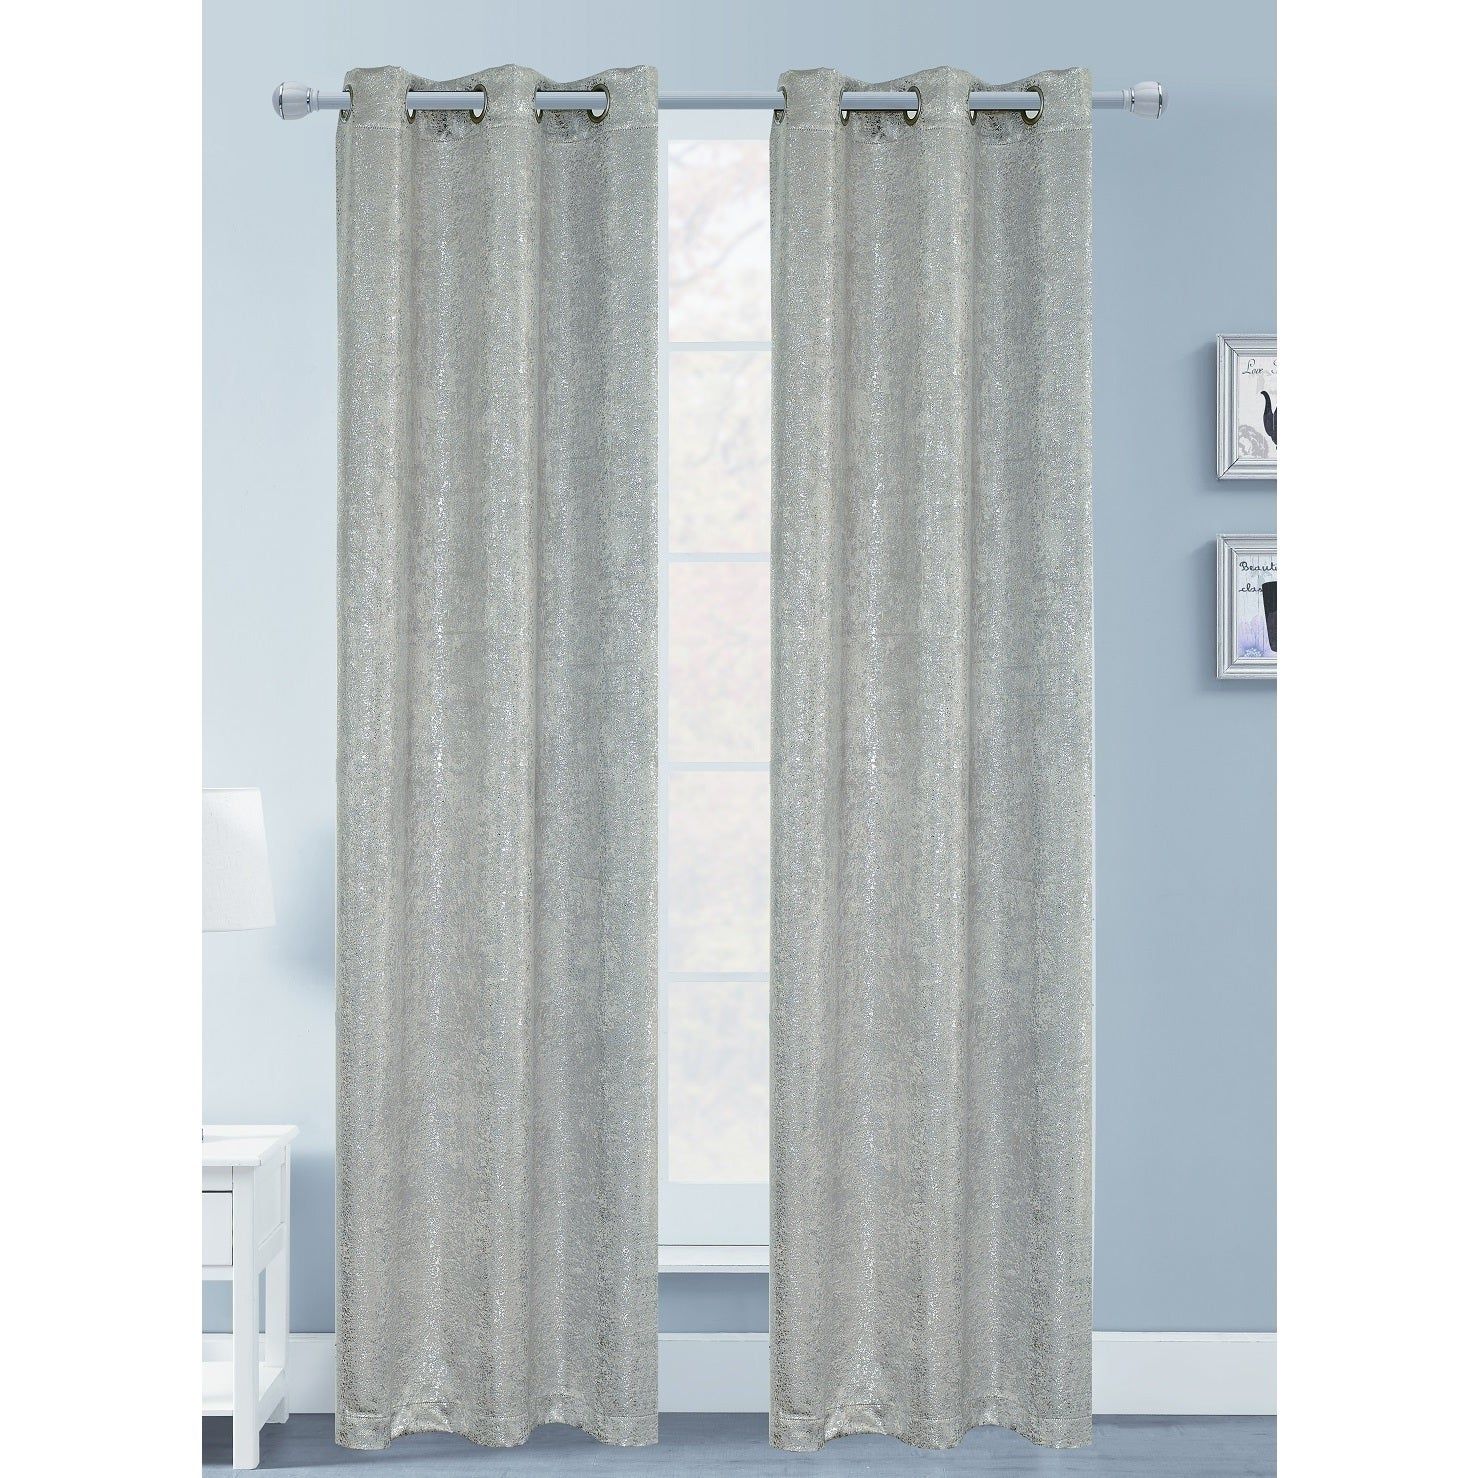 Artistic Silver Foil Blackout Curtain Panel Pair Pertaining To Gracewood Hollow Tucakovic Energy Efficient Fabric Blackout Curtains (Photo 10 of 20)